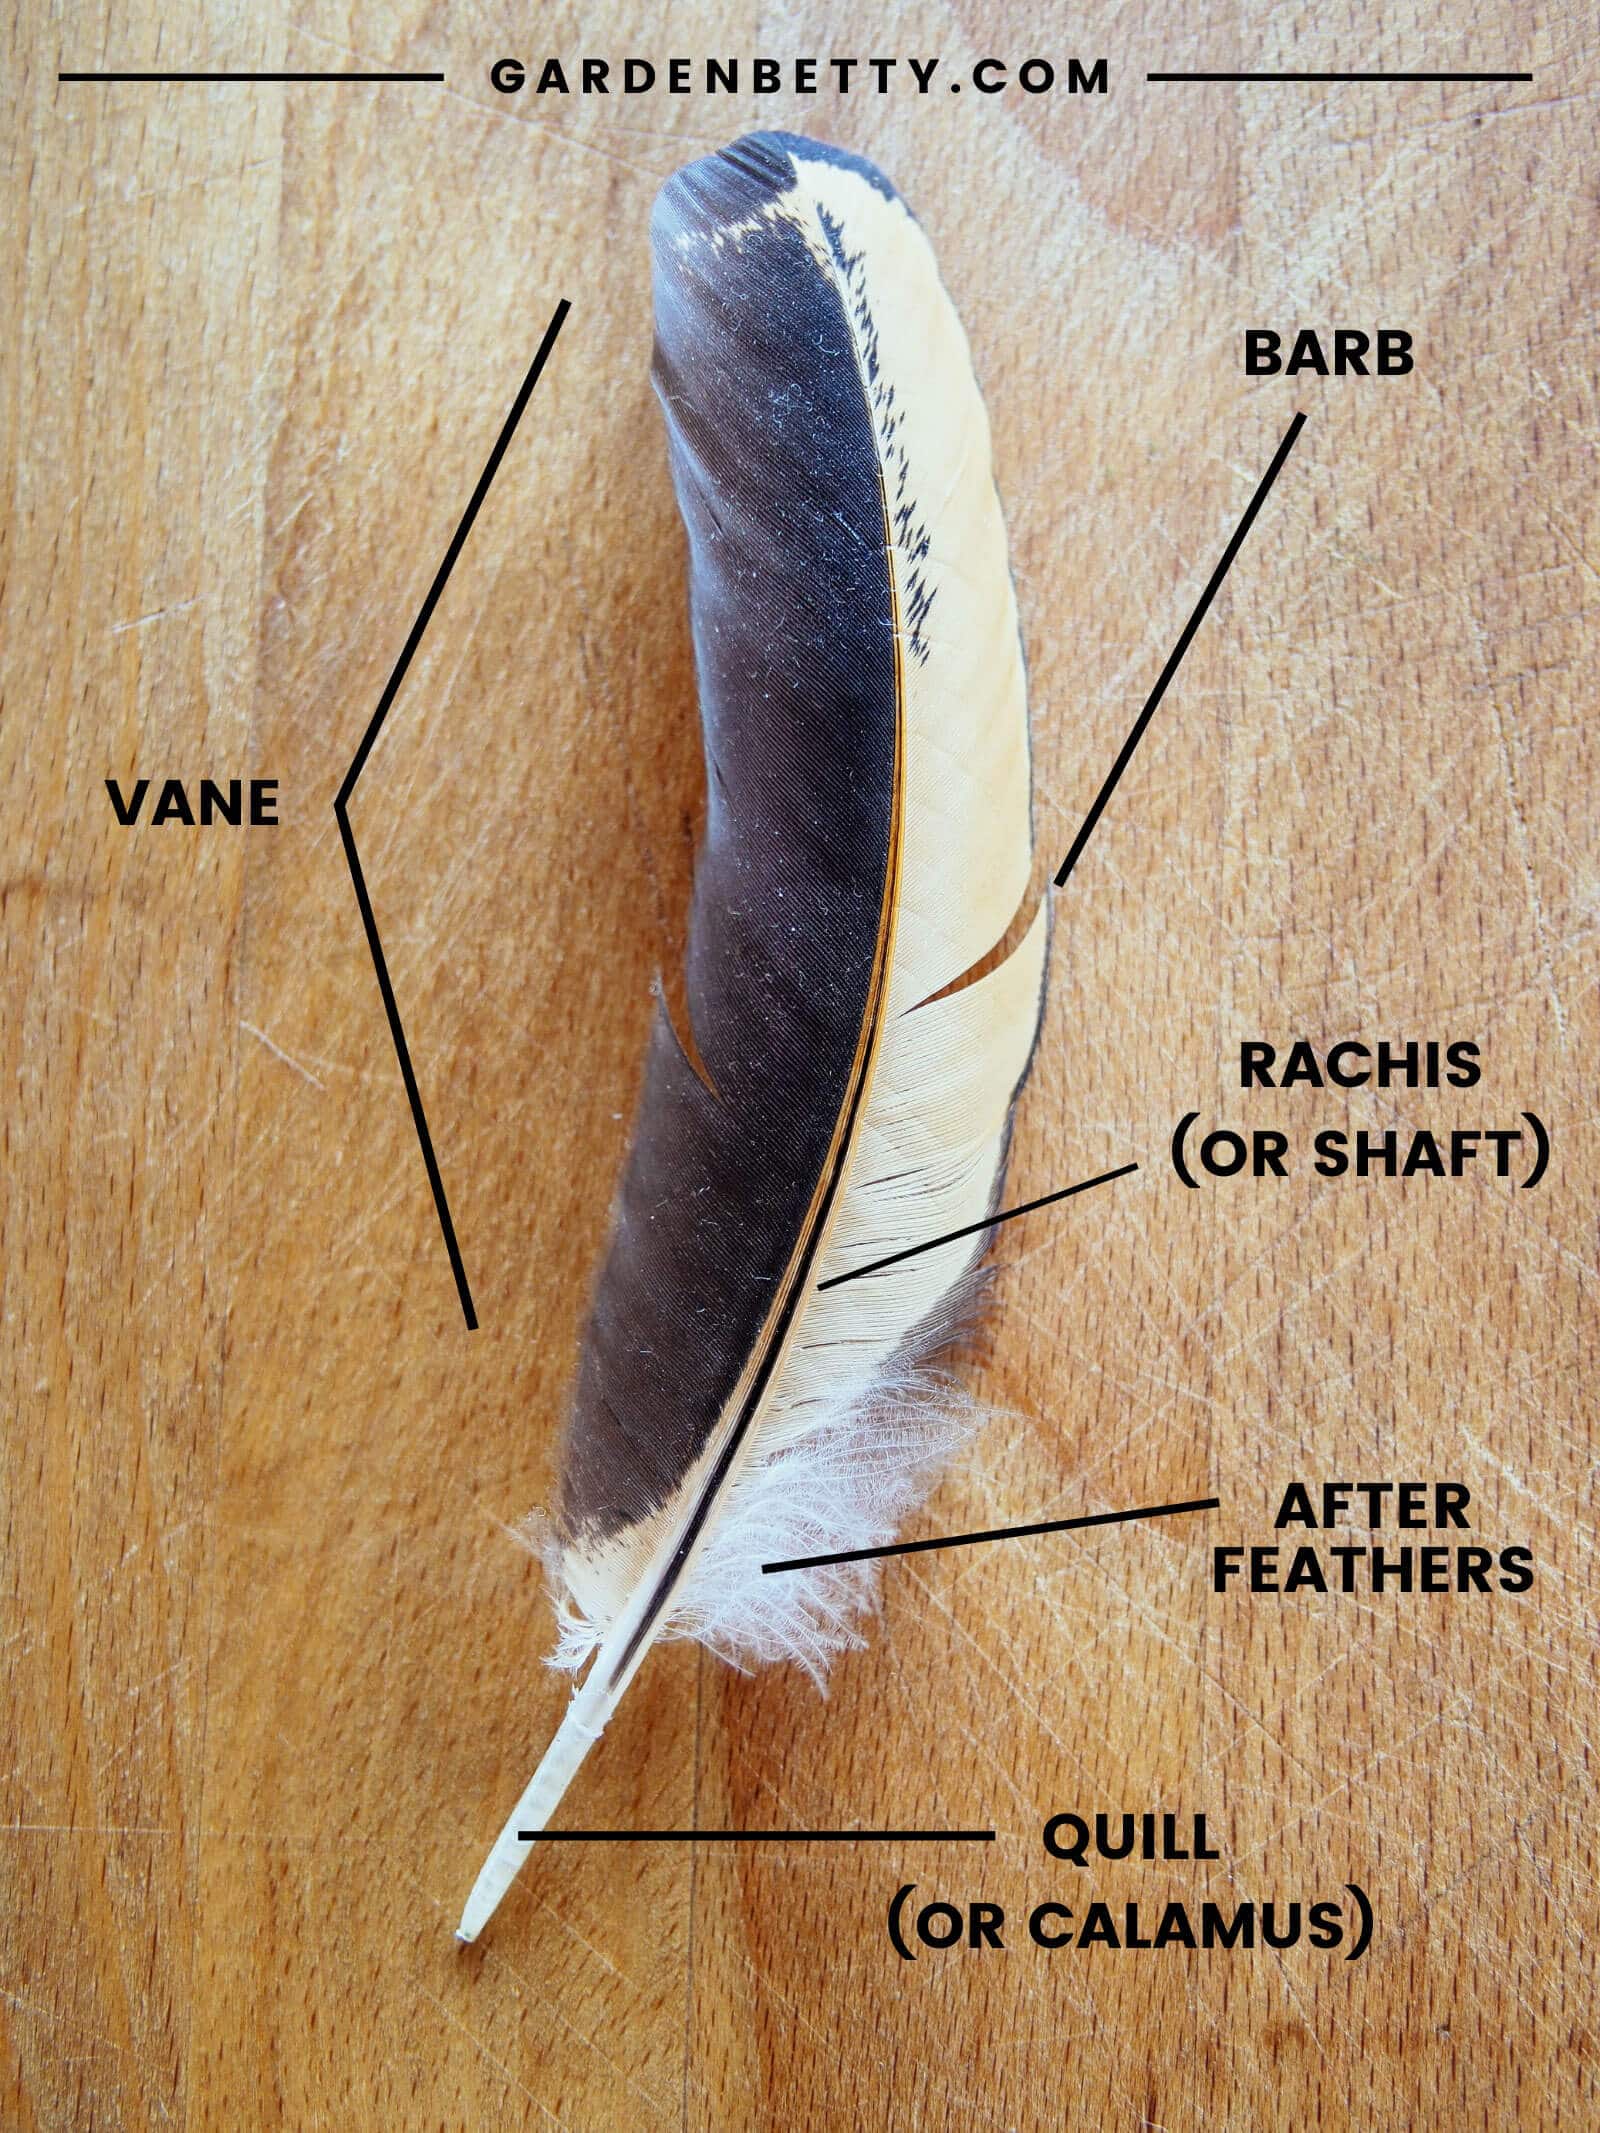 Diagram showing the anatomy of a chicken feather: vane, barb, rachis, afterfeathers, and quill